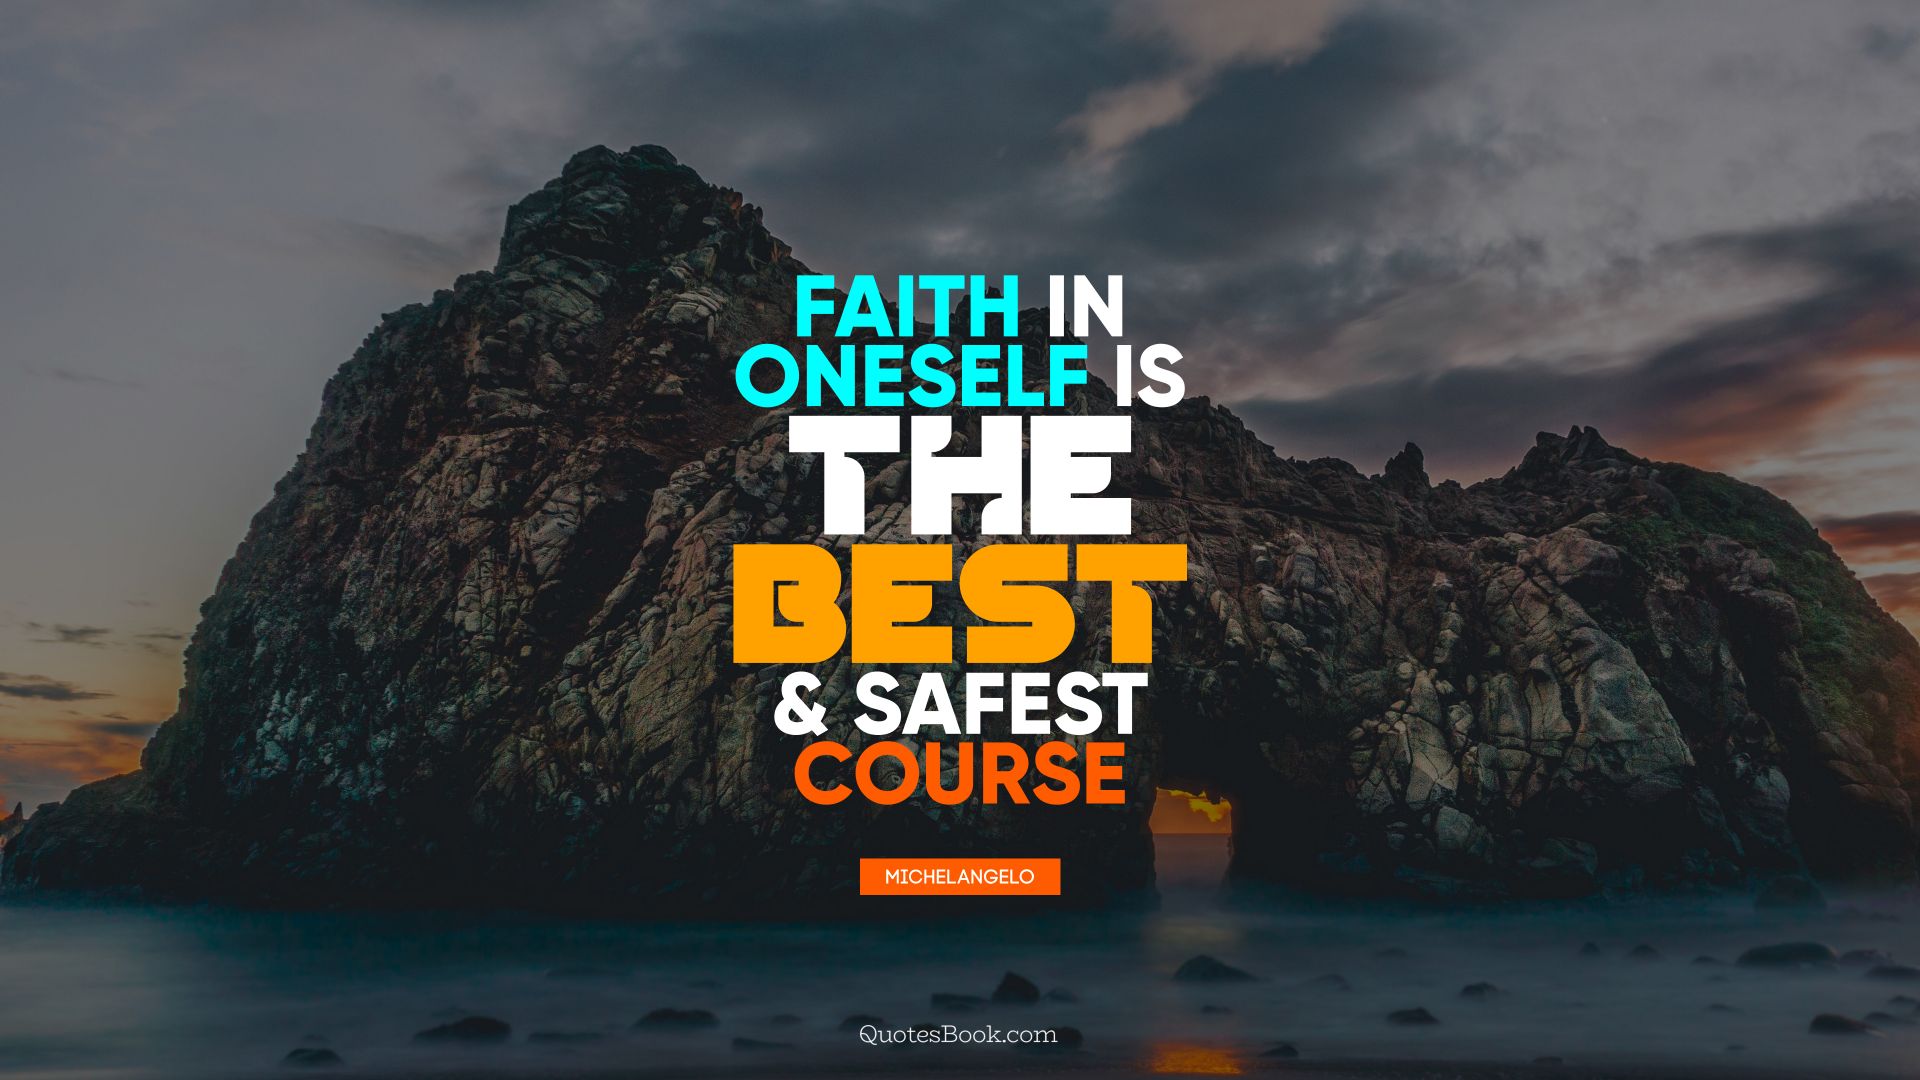 Faith in oneself is the best and safest course. - Quote by Michelangelo